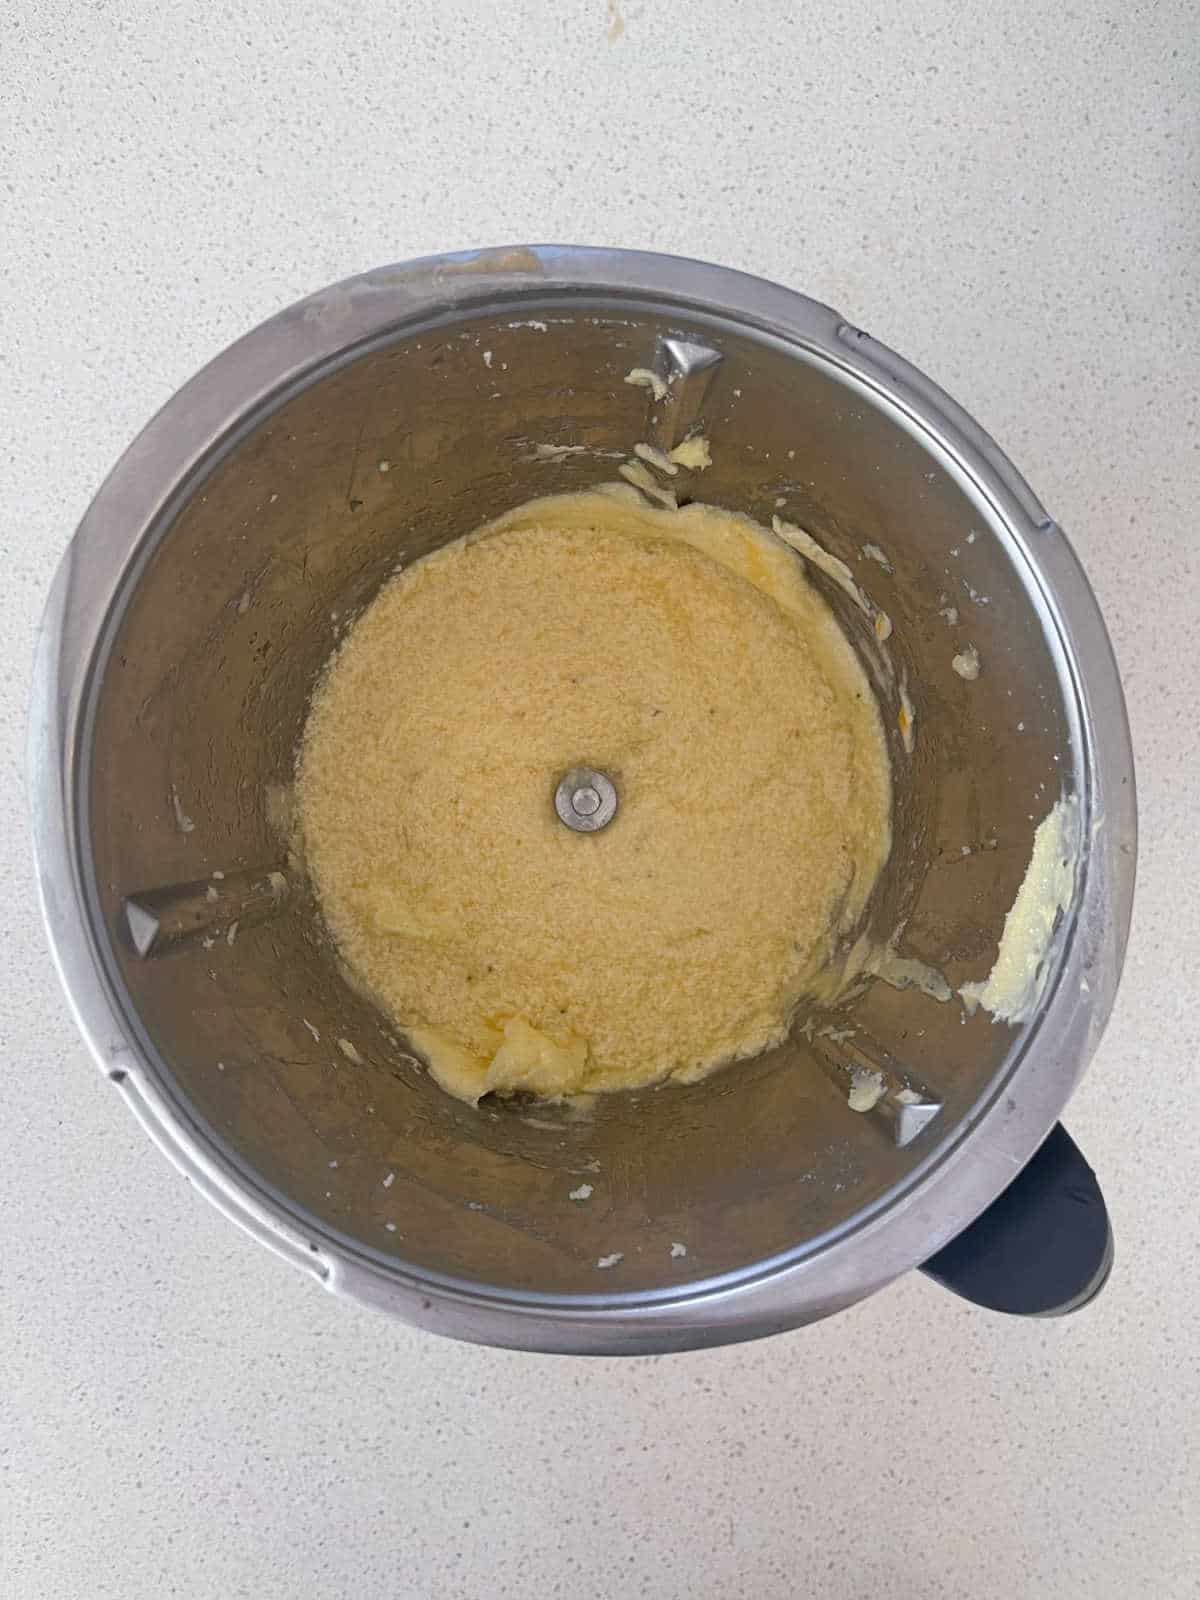 Wet ingredients for banana cake in a theromix bowl.